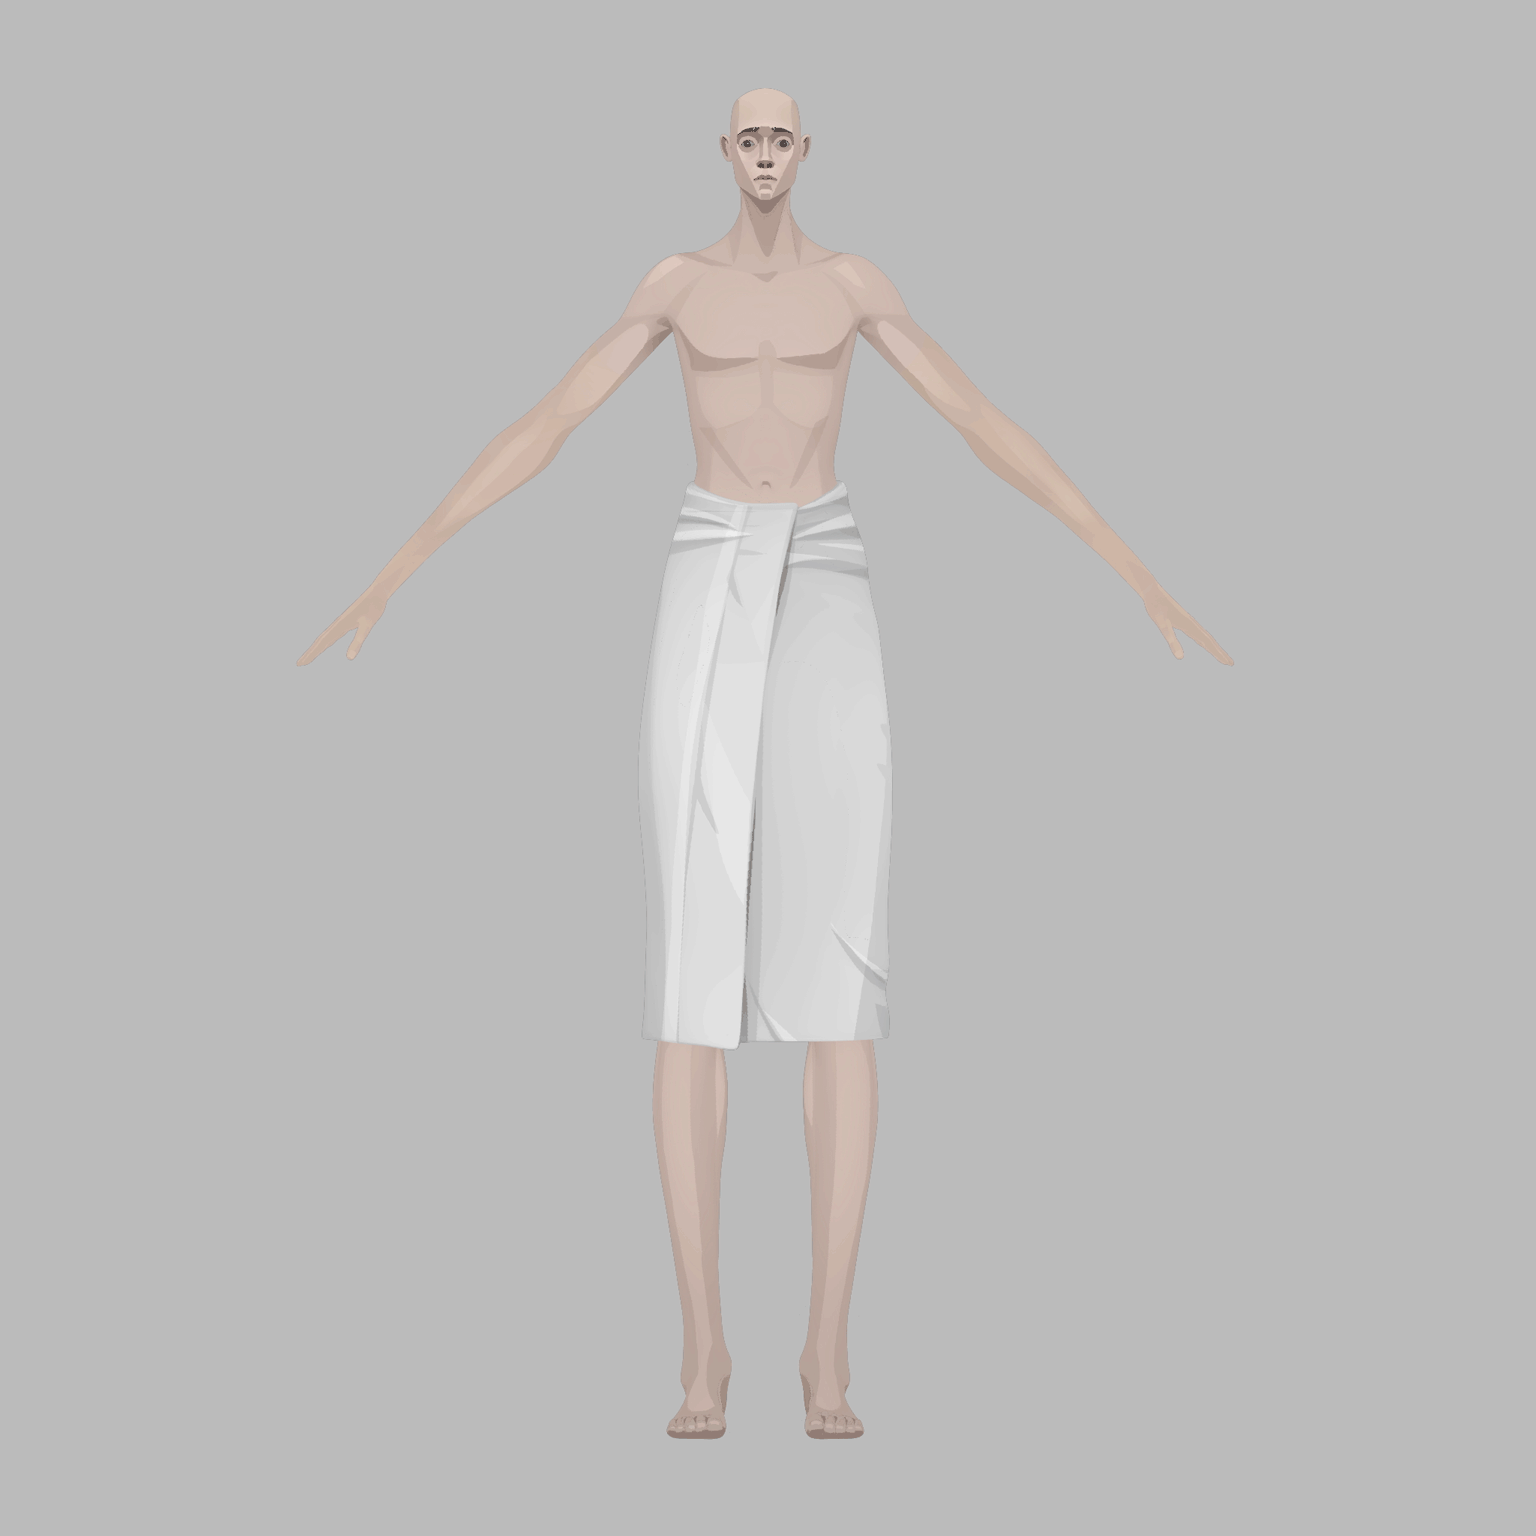 Textured model turntable of Isaac in a bath towel